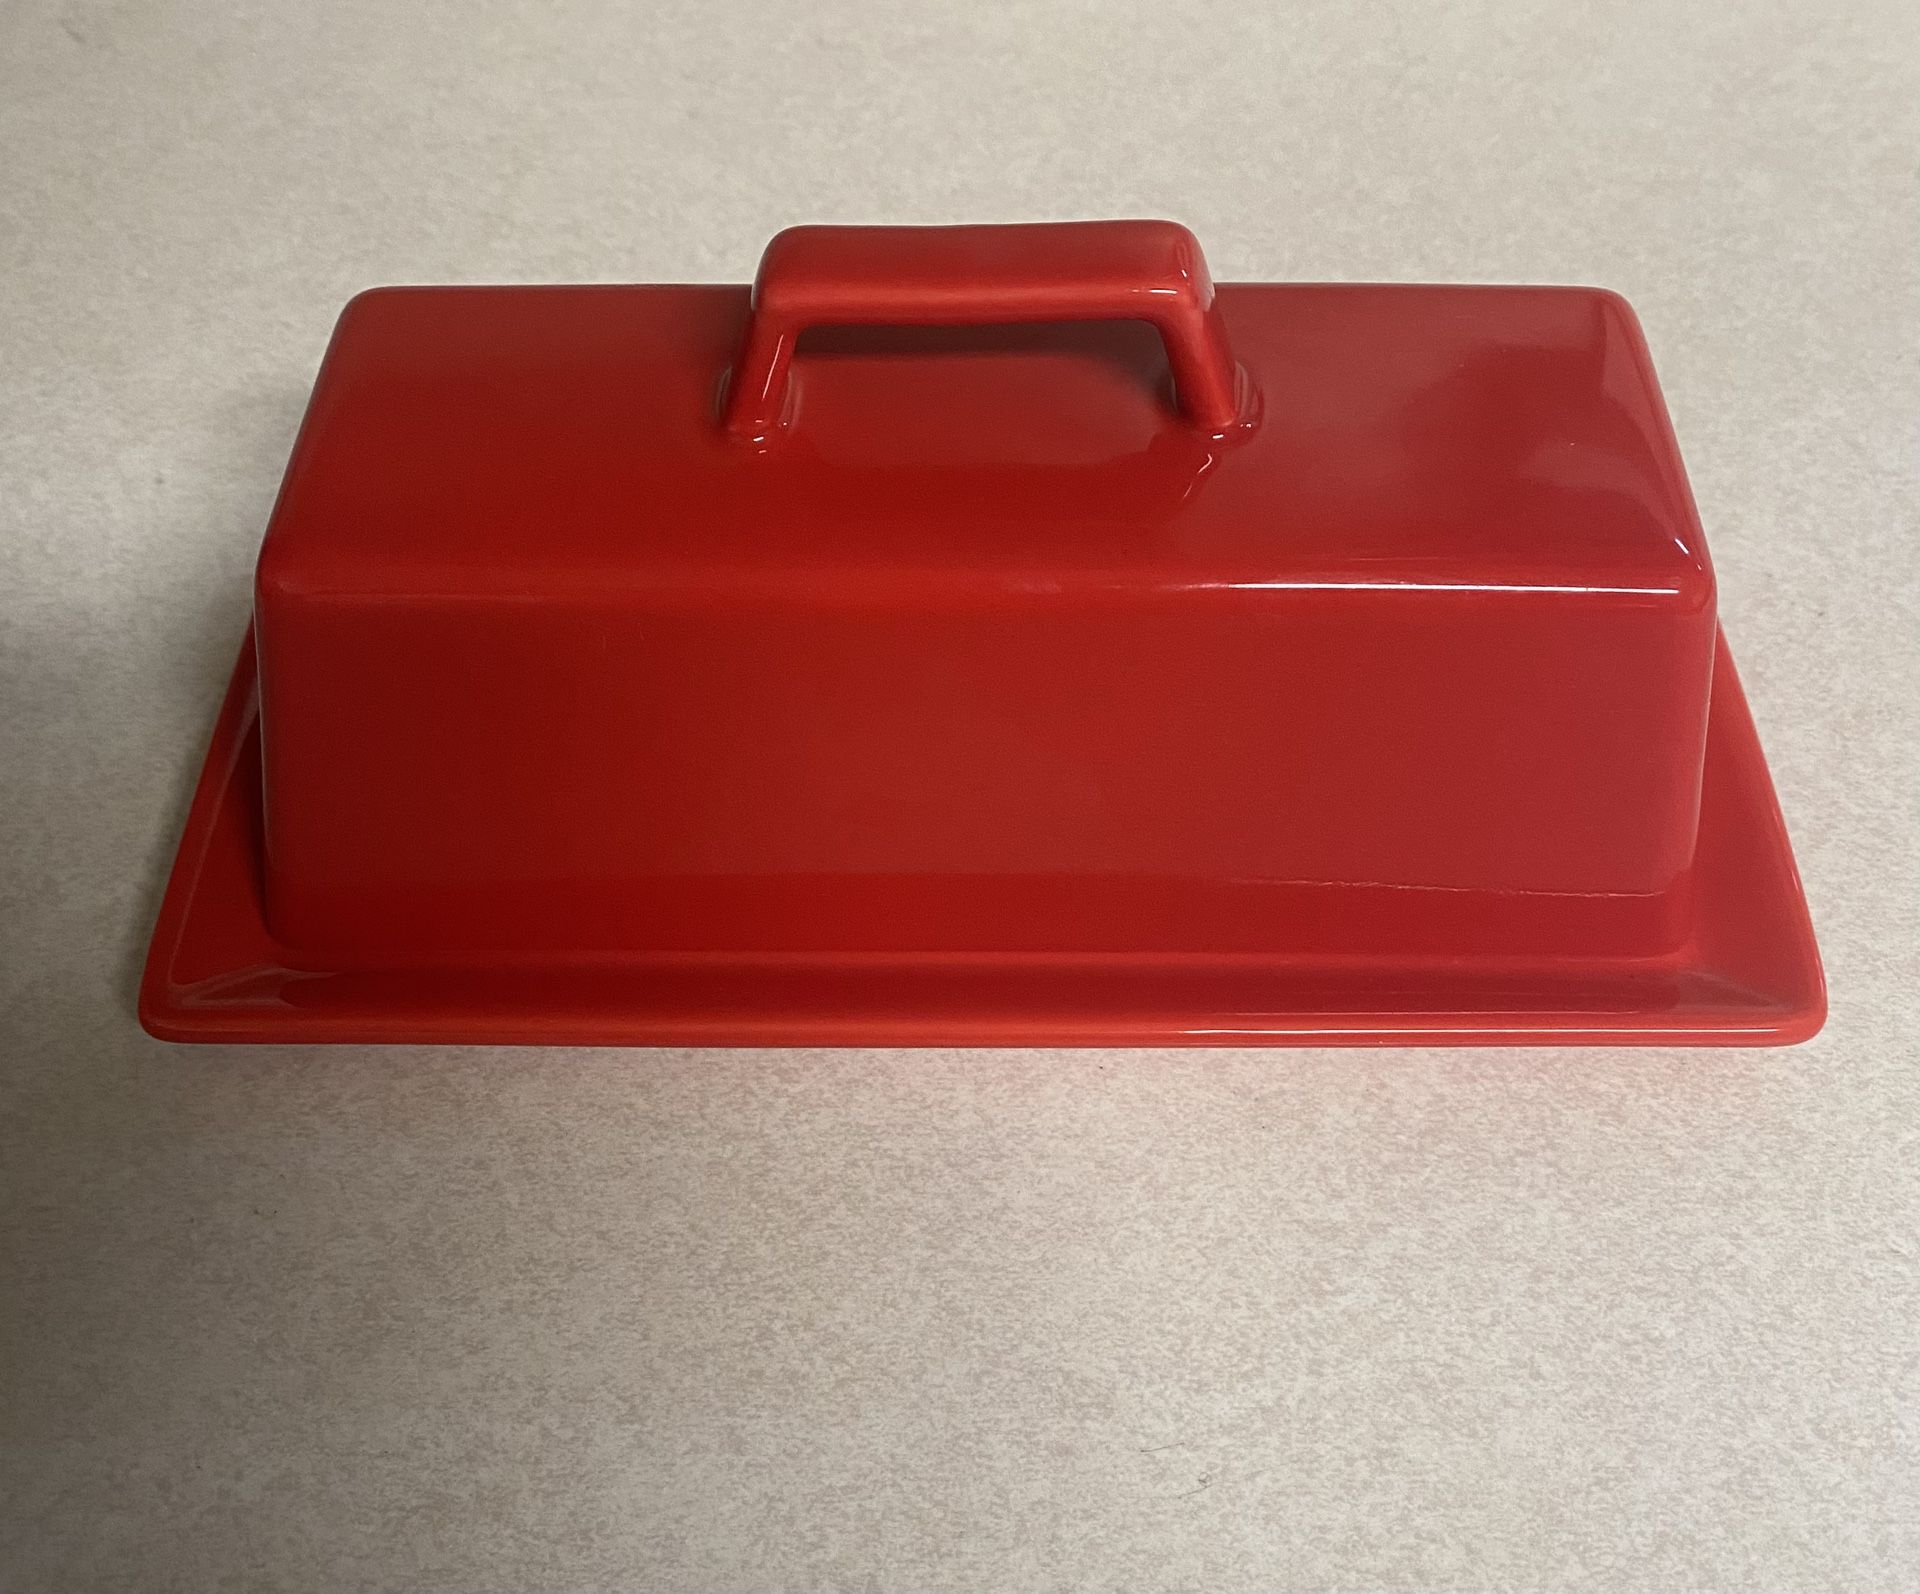 Porcelain Butter Dish with Lid, Red